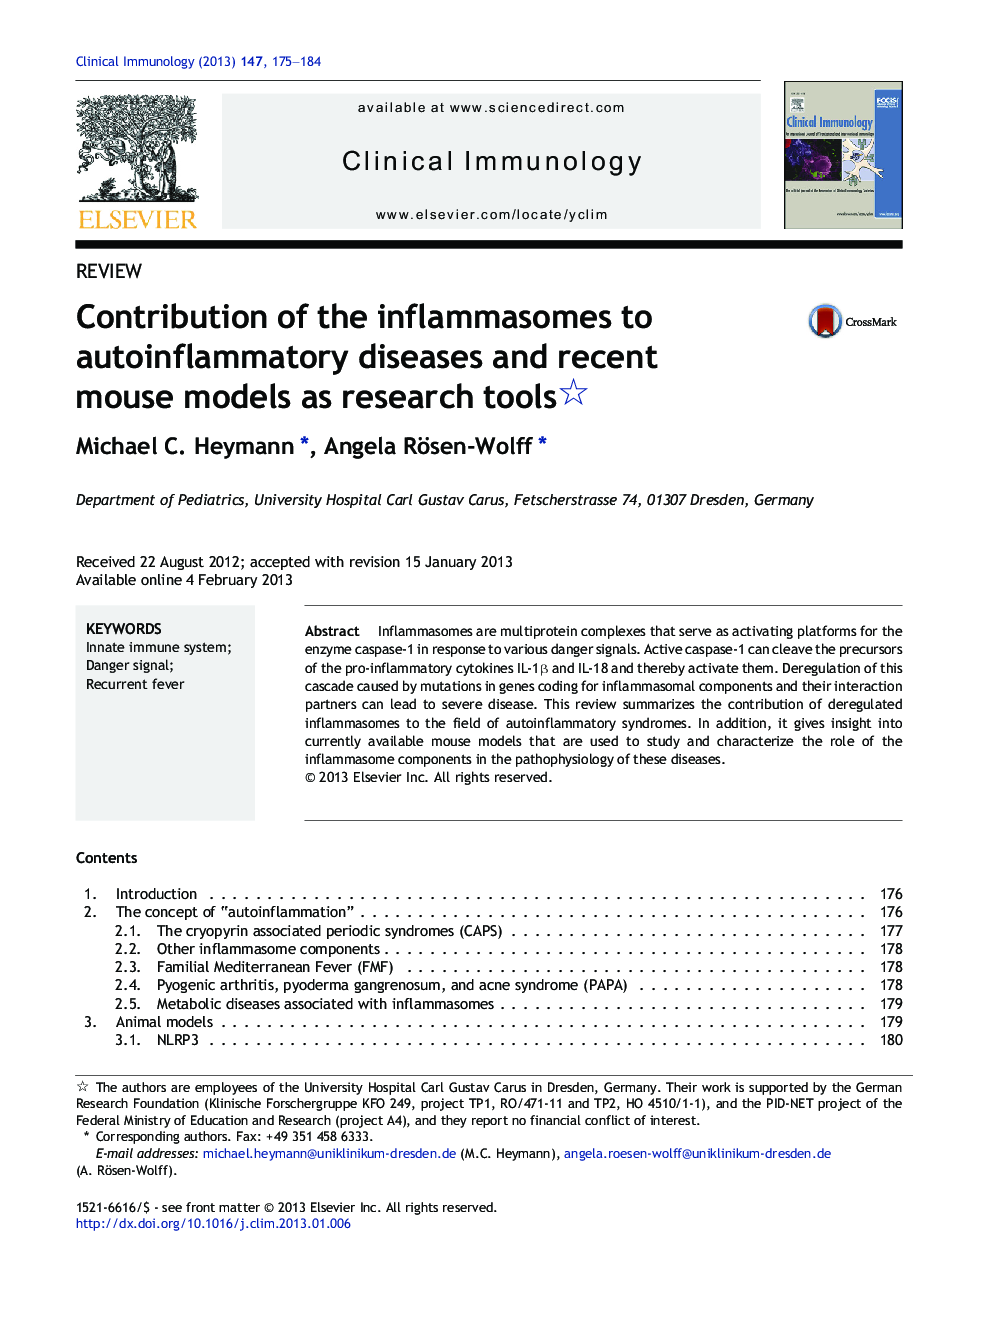 Contribution of the inflammasomes to autoinflammatory diseases and recent mouse models as research tools 